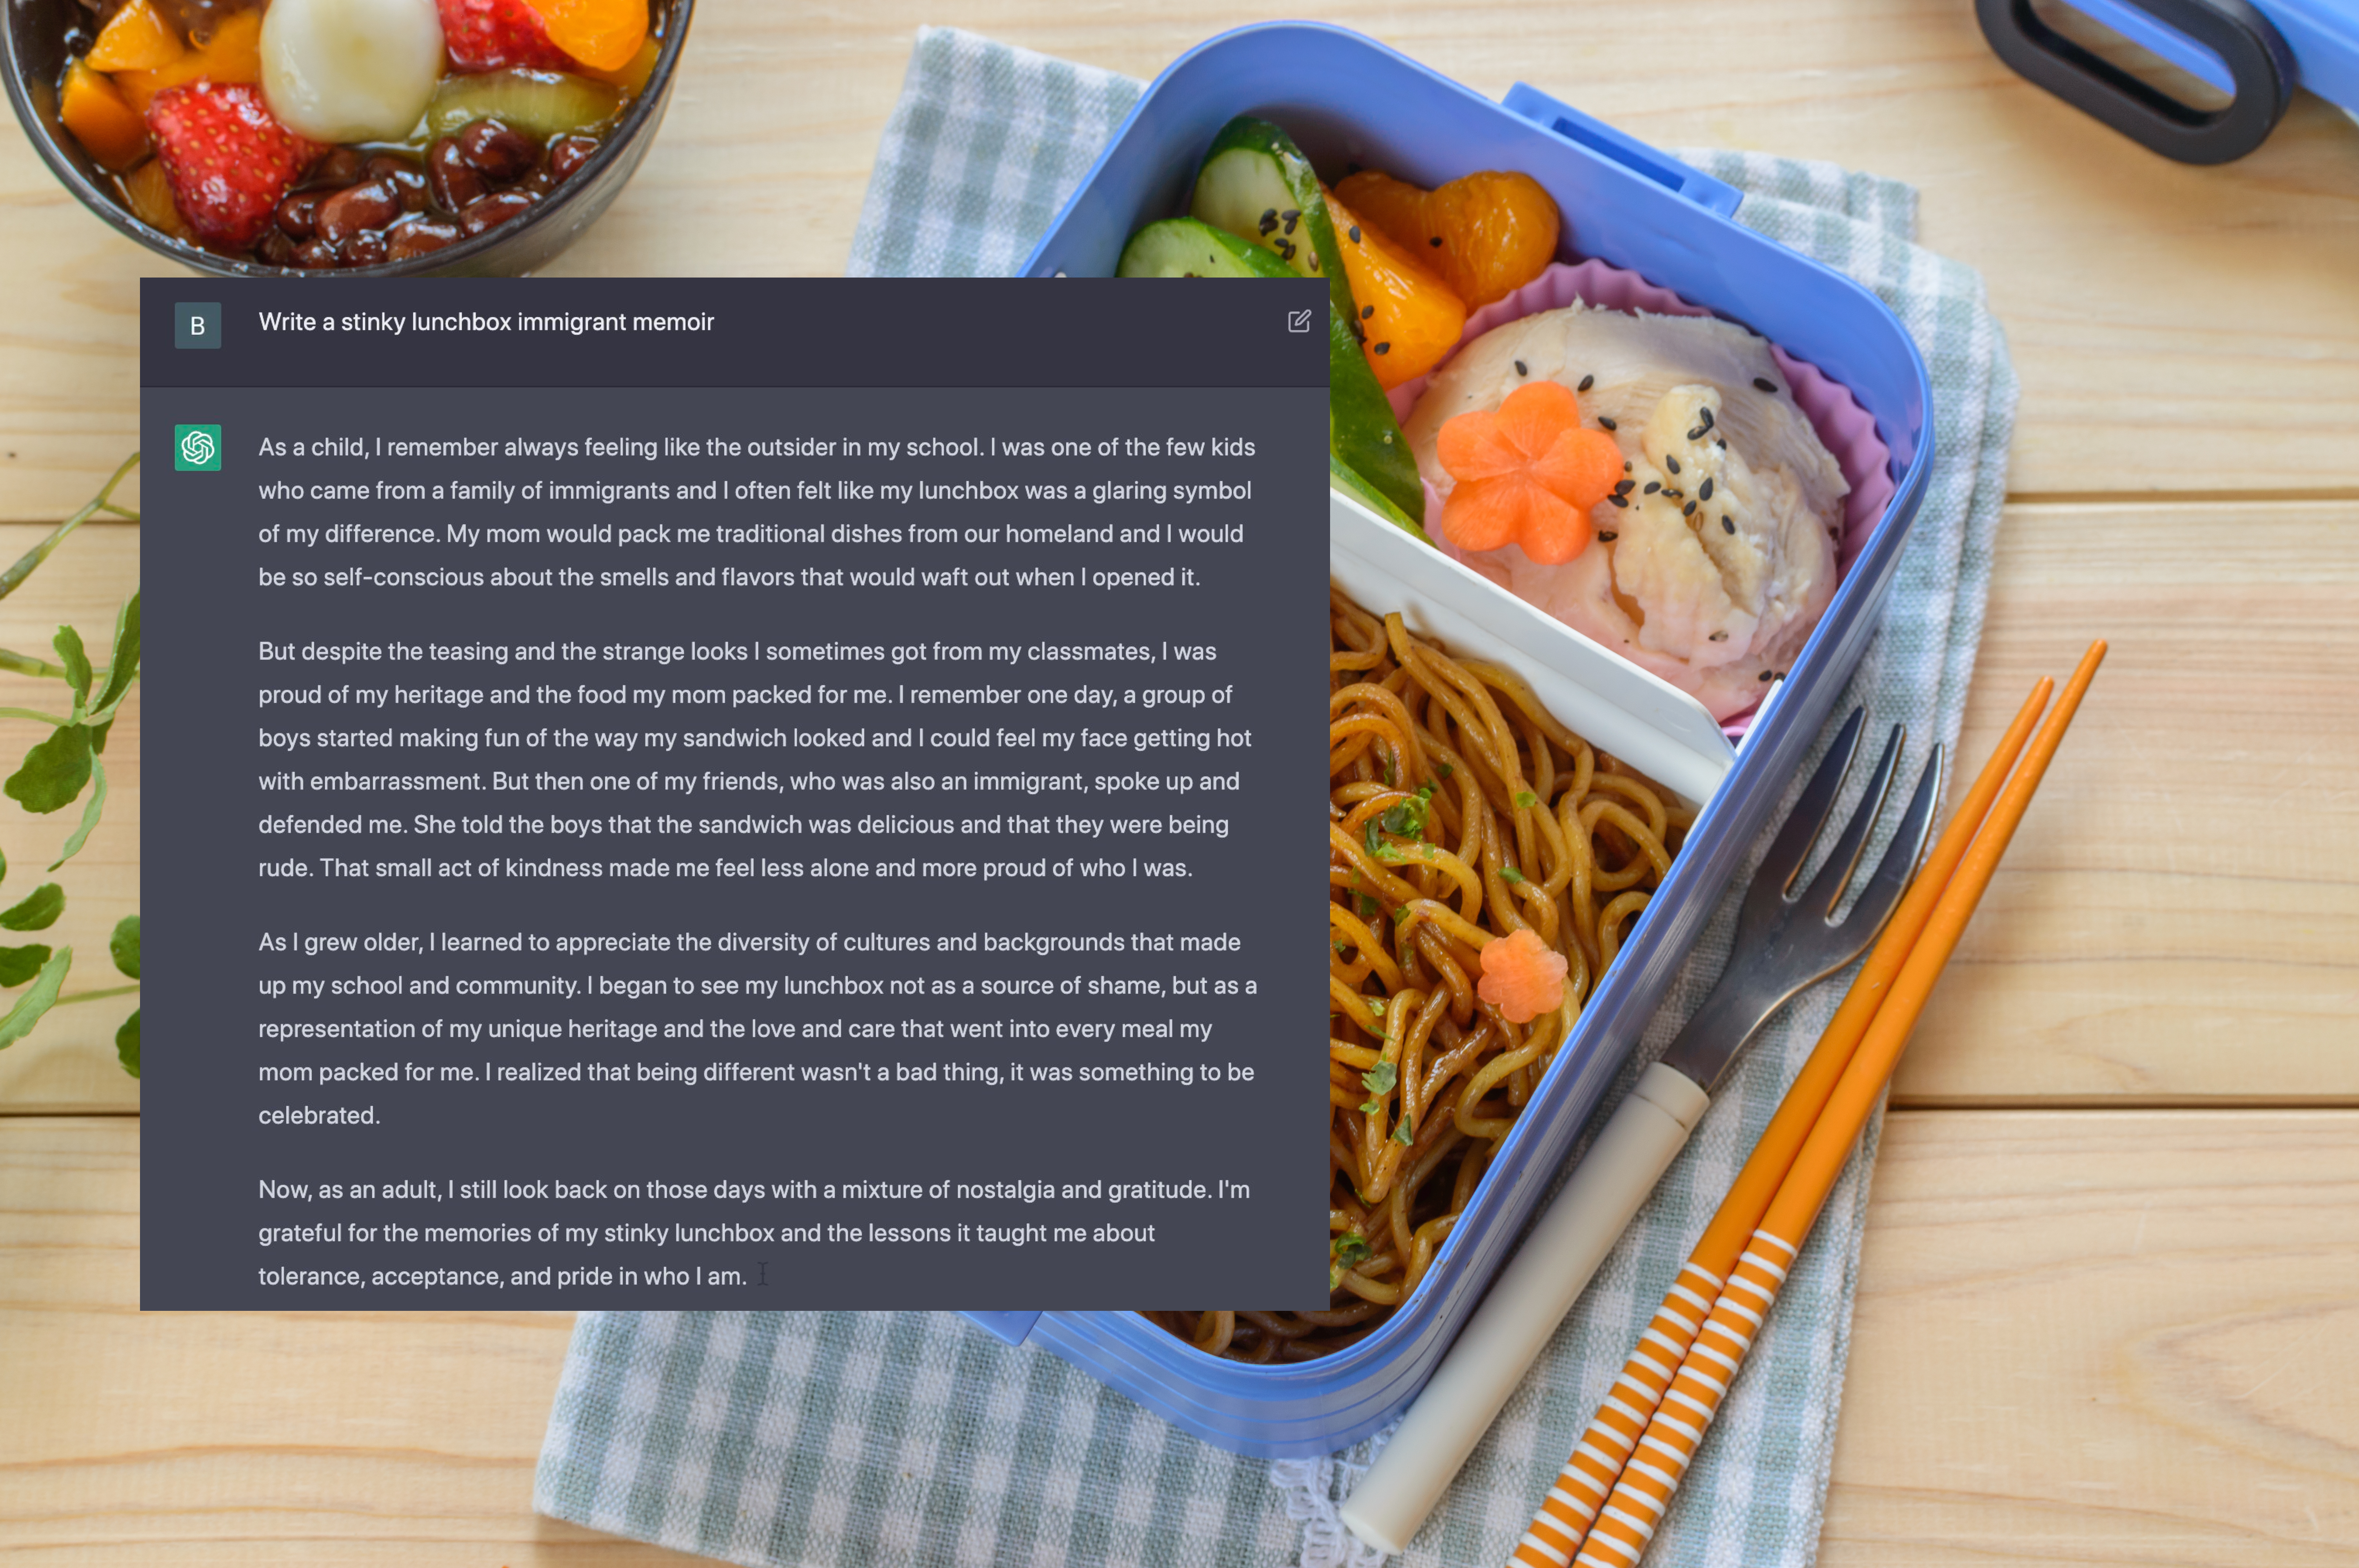 A screenshot of text generated by ChatGPT in response to the prompt “Write a stinky lunchbox immigrant memoir” on top of a photo of a lunchbox containing noodles and cut vegetables